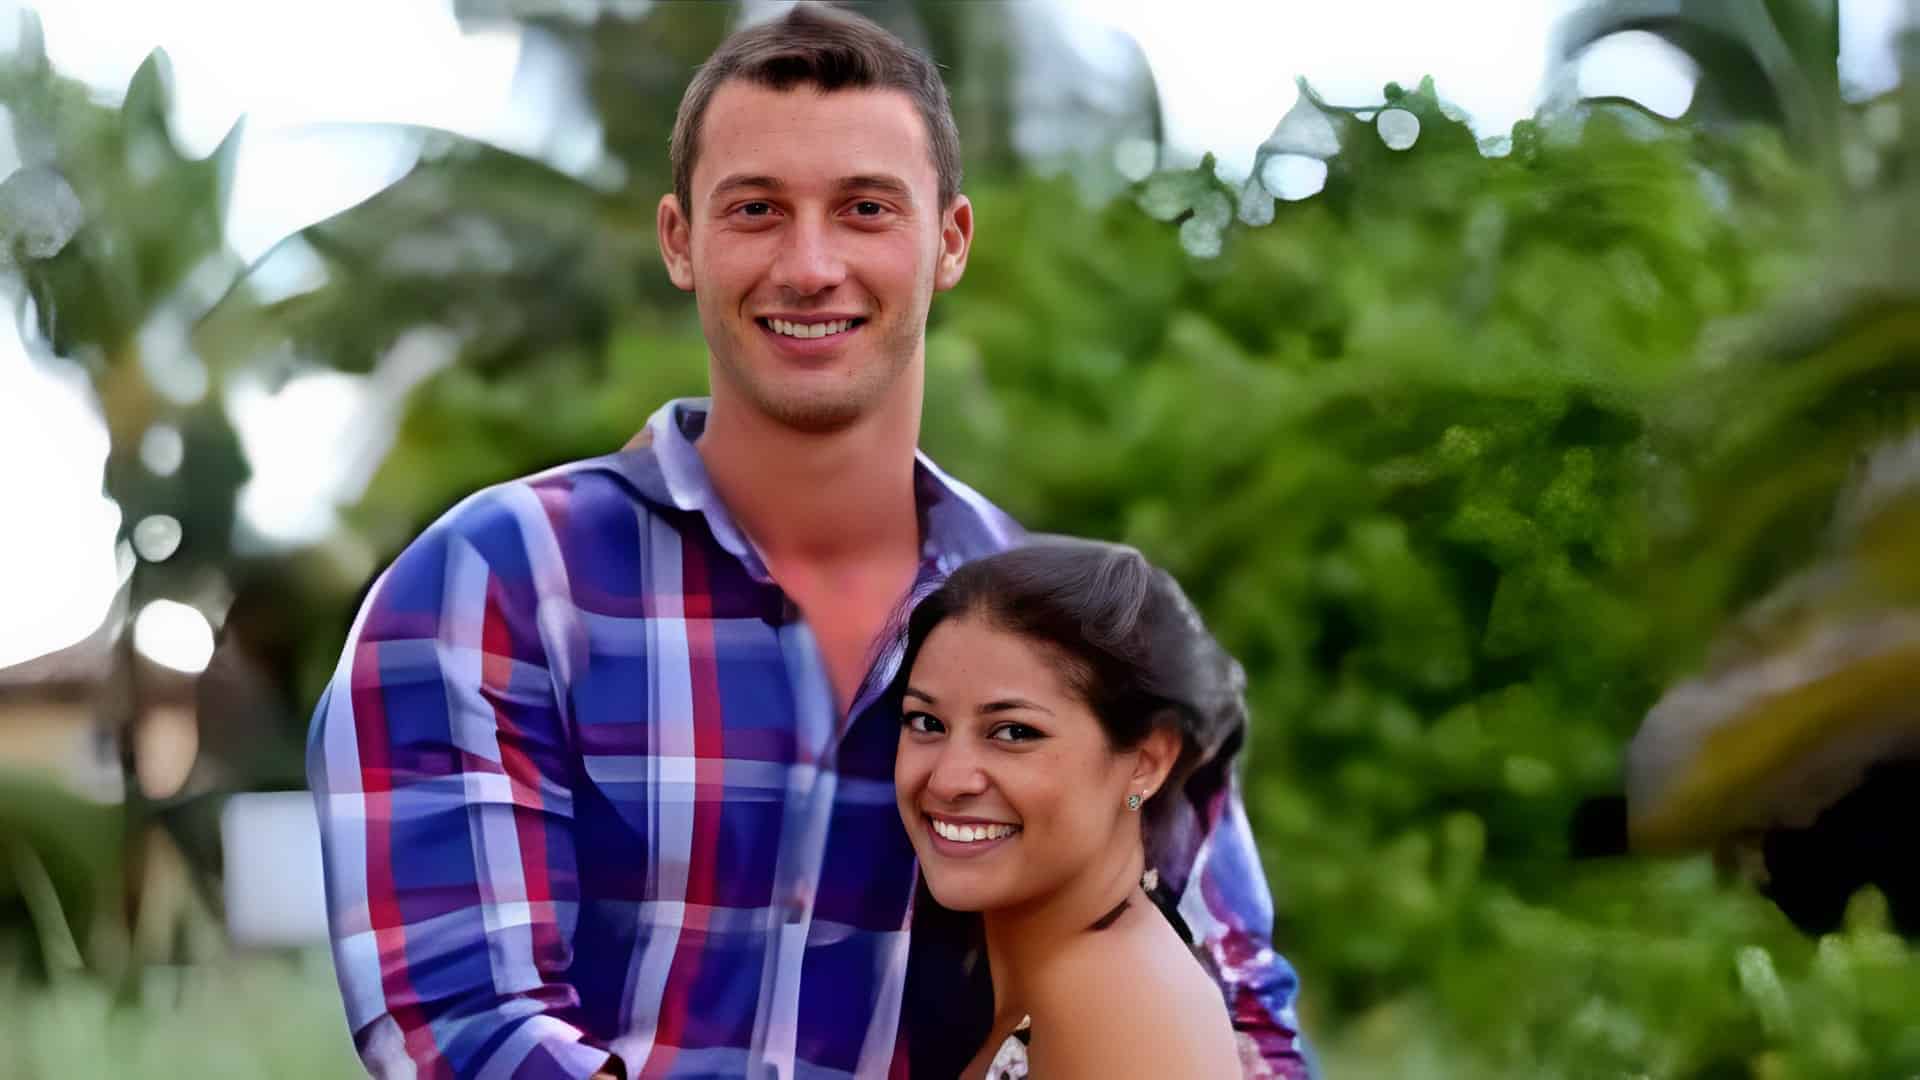 90 Day Fiancé: The Other Way Season 4 Episode 7